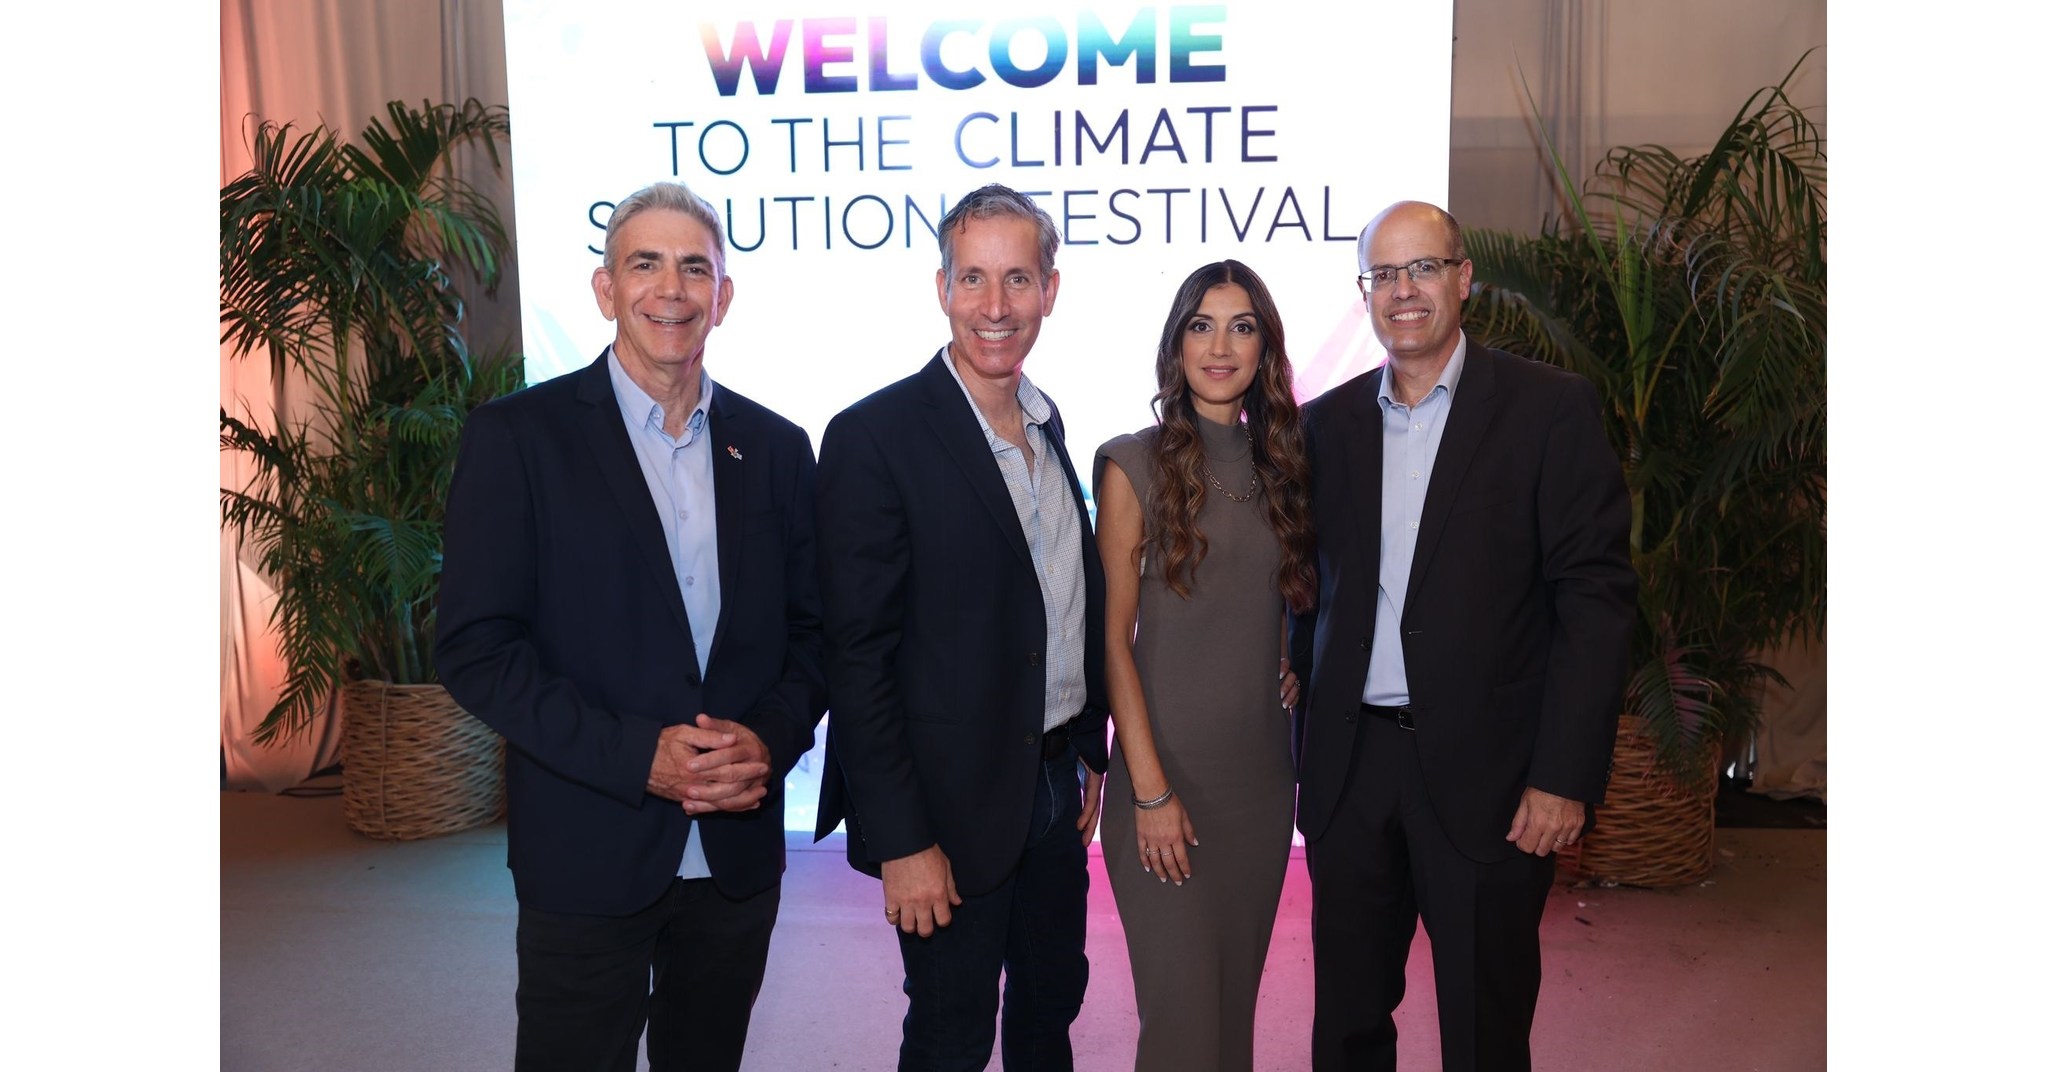 More than $2 million awarded to Israeli Climate-Tech researchers and startups at the Climate Solutions Festival USA - English - USA - English - PR Newswire